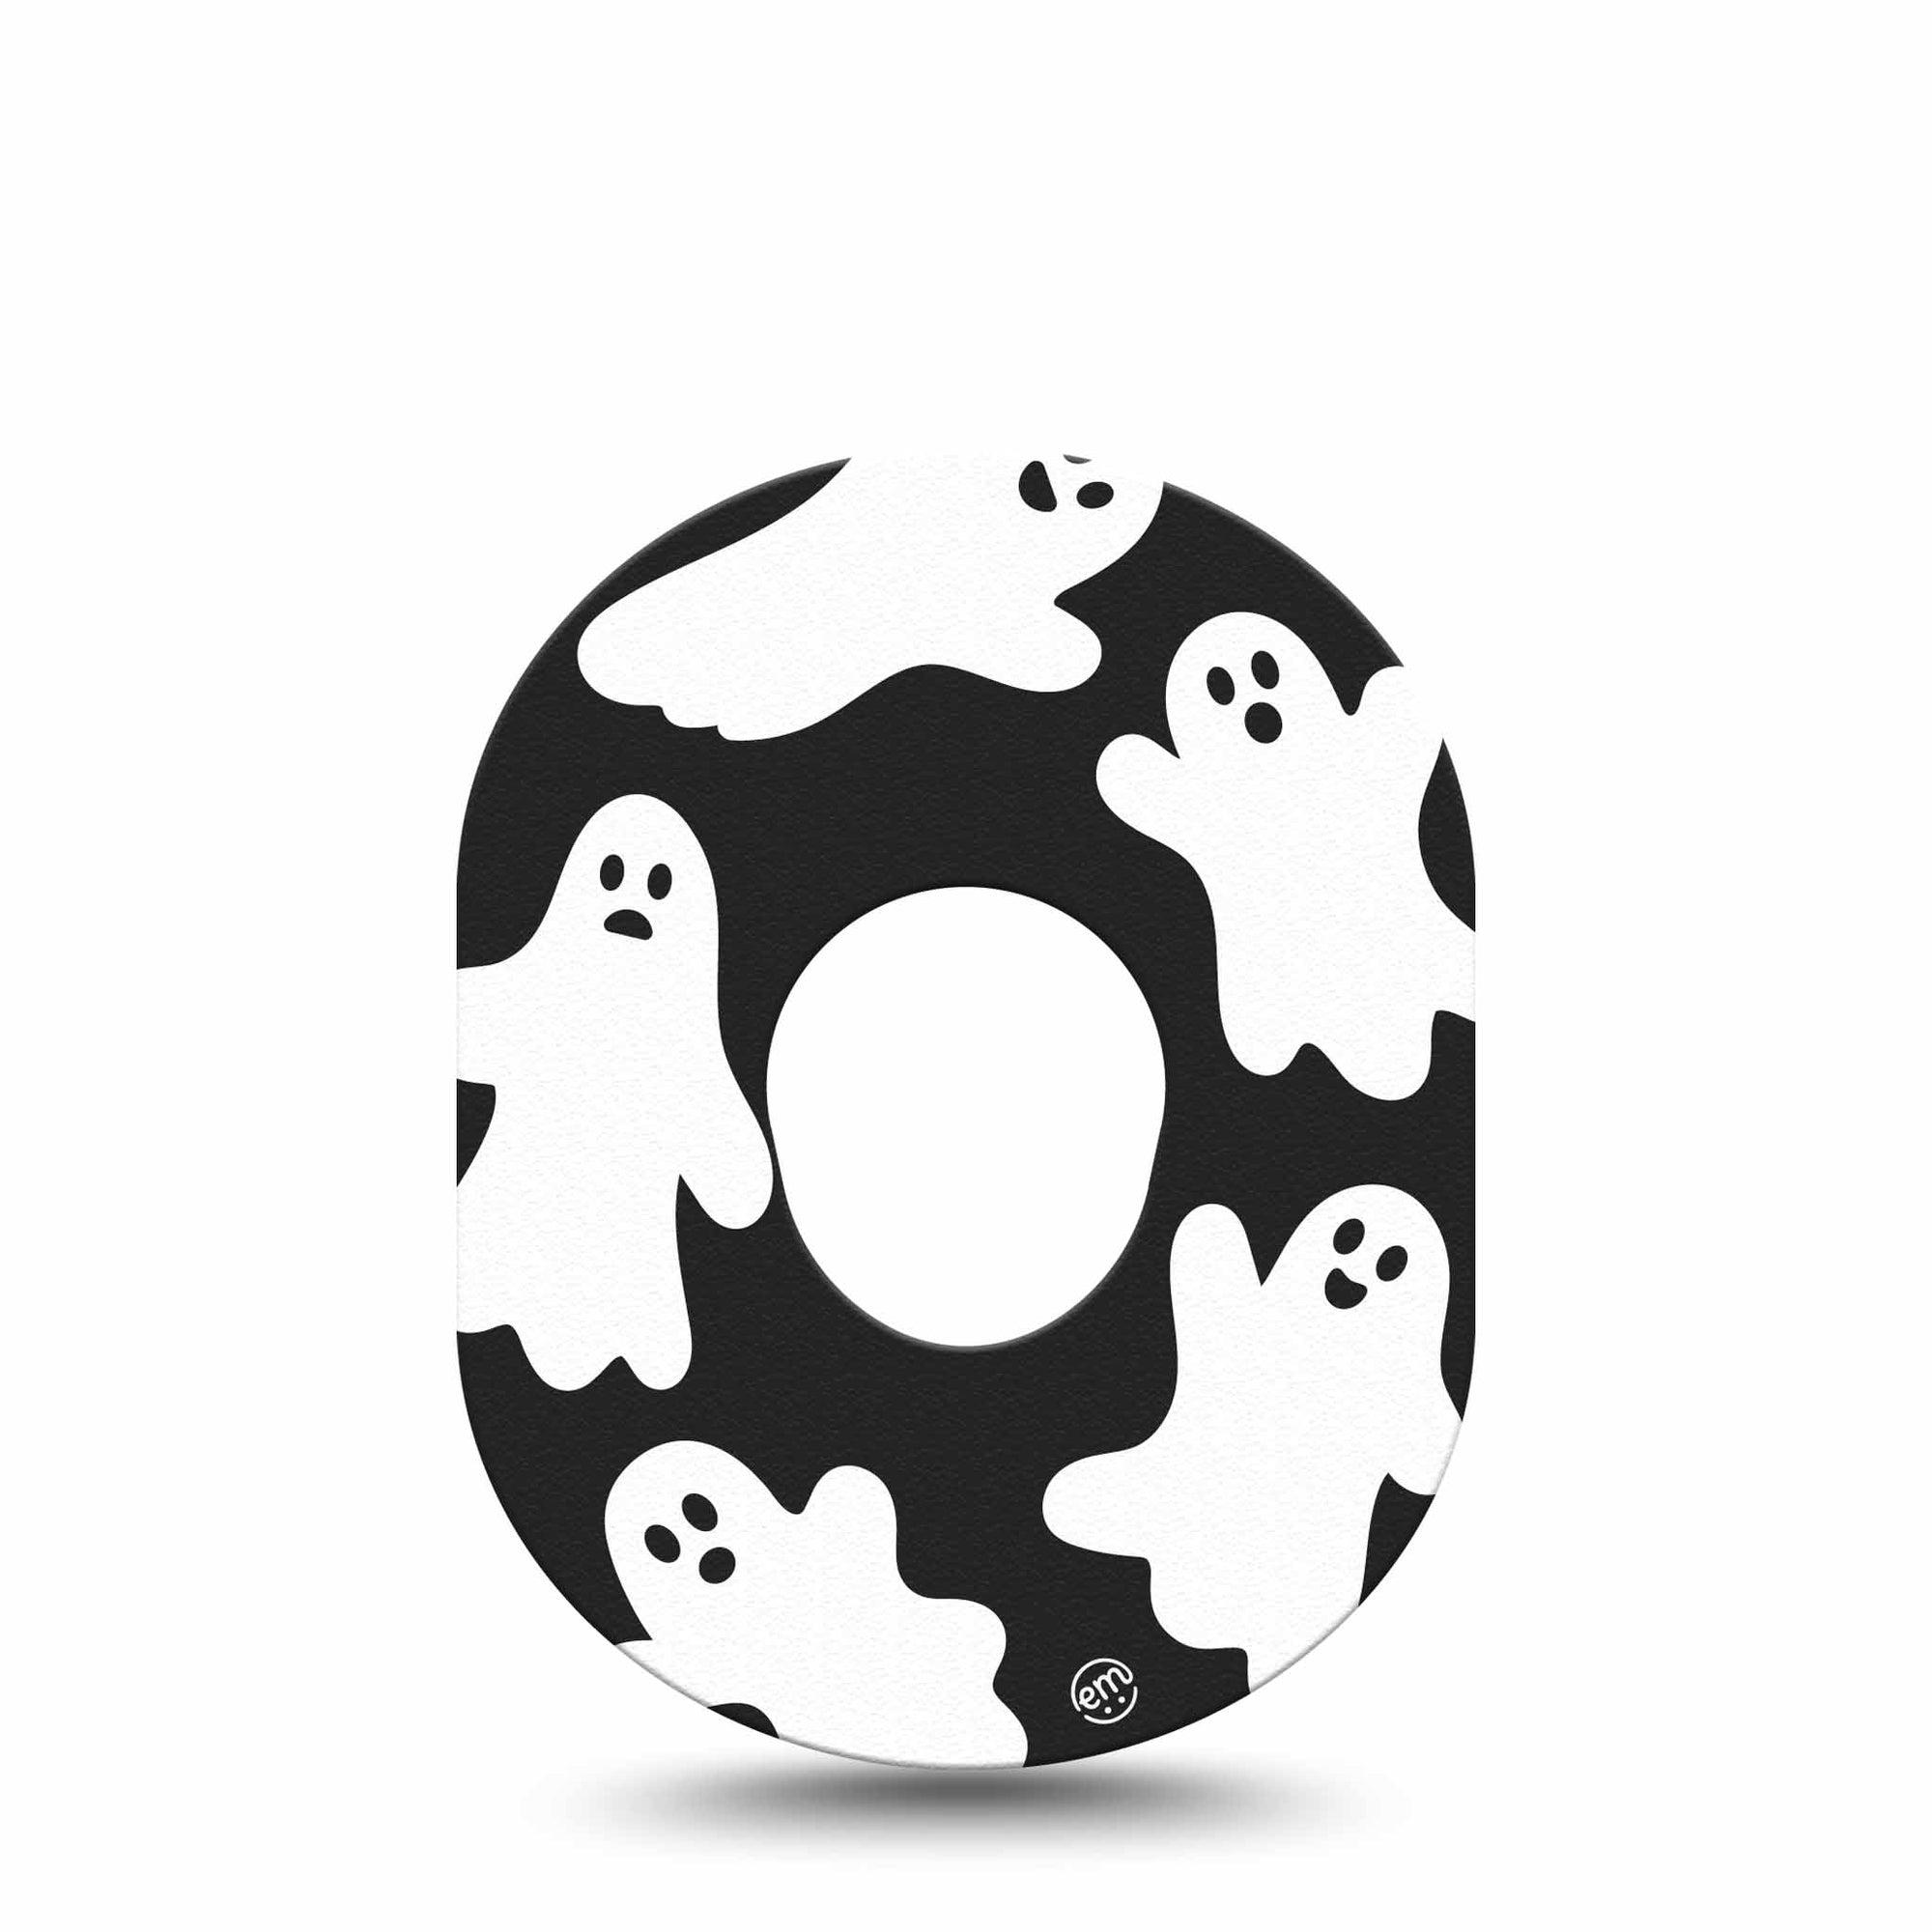 ExpressionMed ExpressionMed, Ghost Dexcom G7 Tape, Single, Fun Ghouls Themed CGM Overlay Patch Design